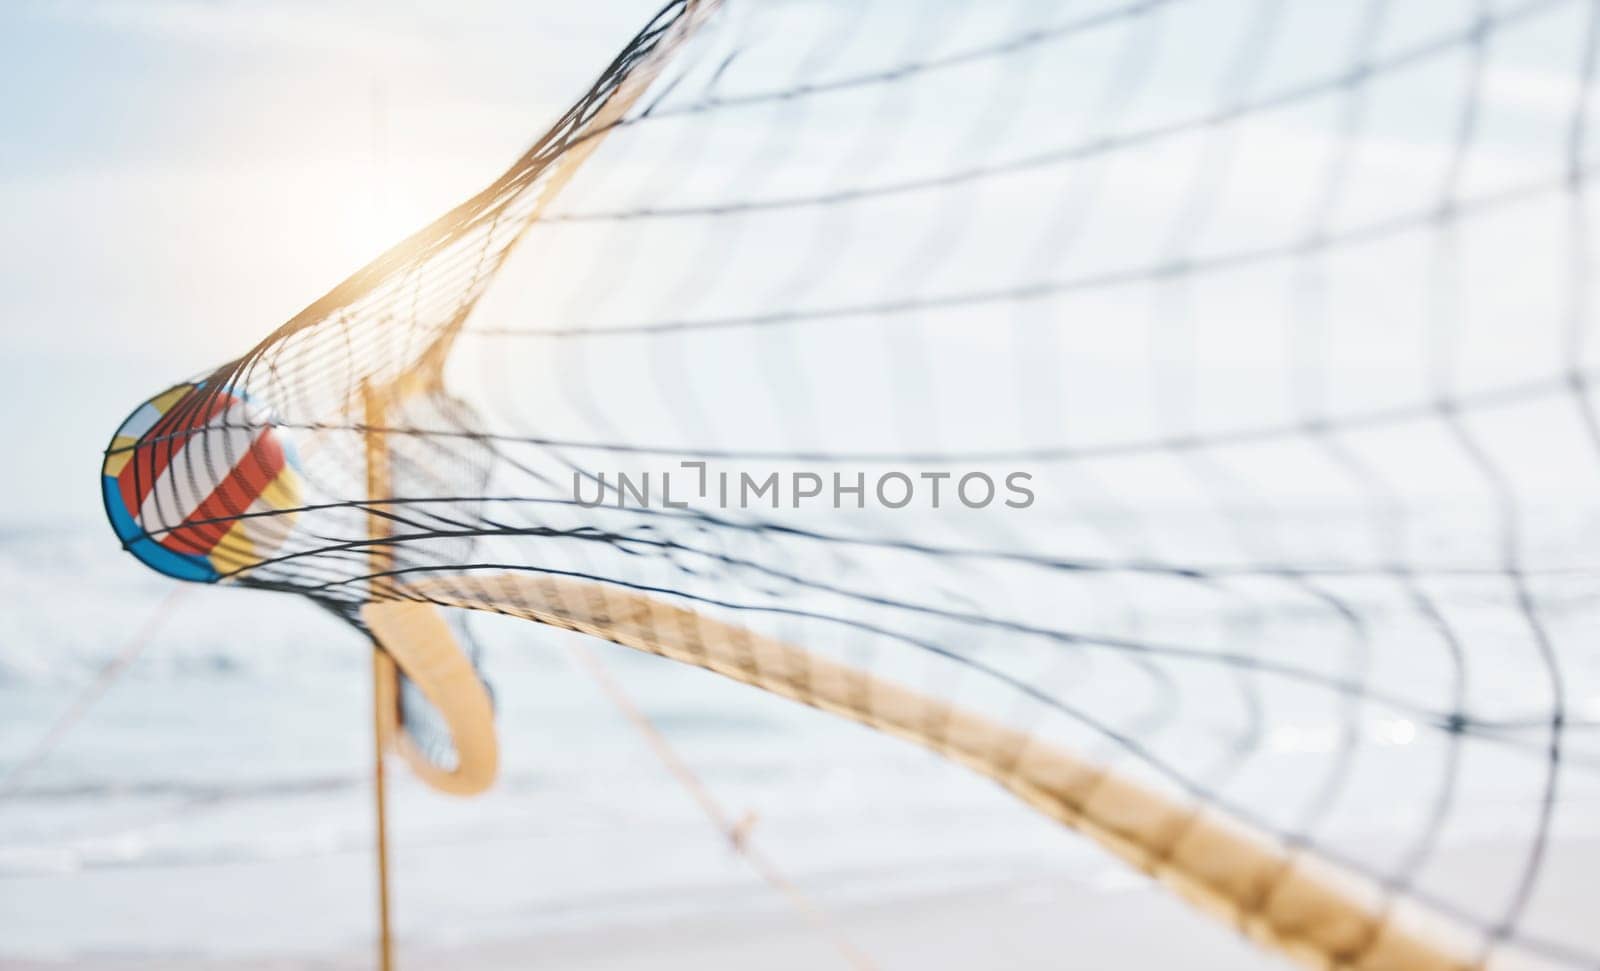 Volleyball, net and speed at beach sports for fitness, exercise or training in summer. Holiday, sun and equipment for game or competition by the ocean in the morning for cardio or a game for vacation.